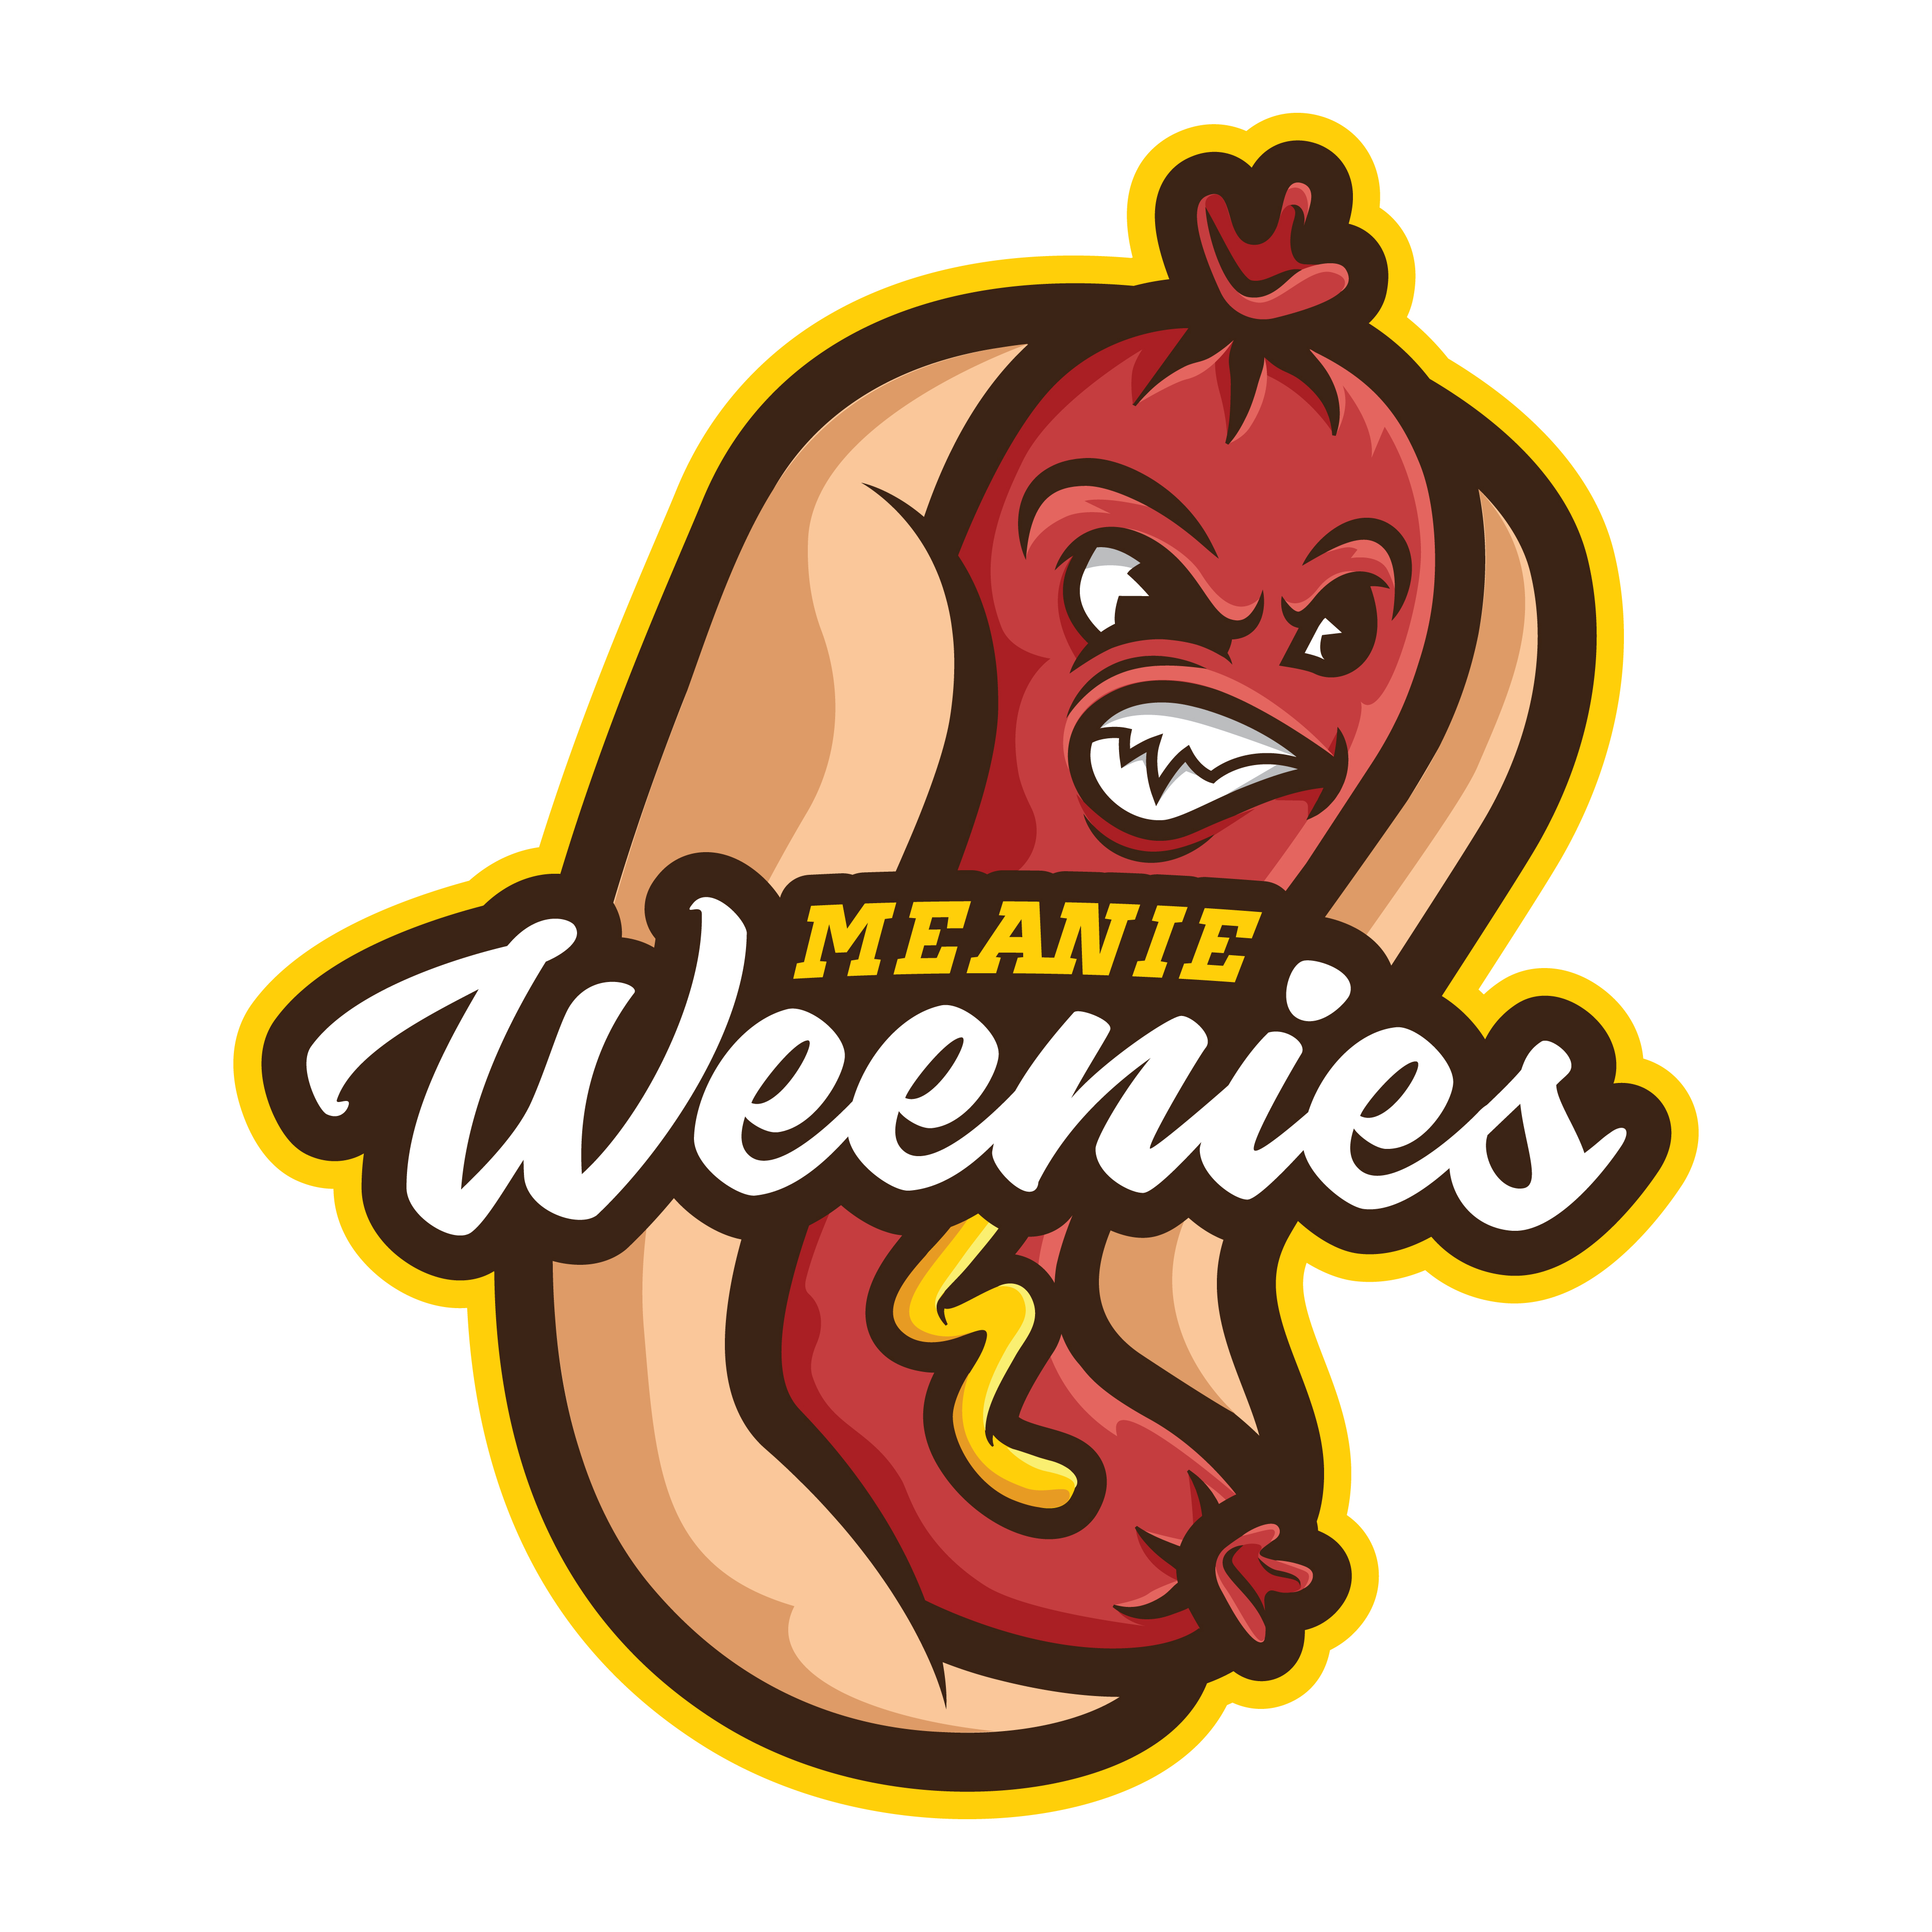 Meanie Weenies logo design by logo designer Stefanie Passo for your inspiration and for the worlds largest logo competition